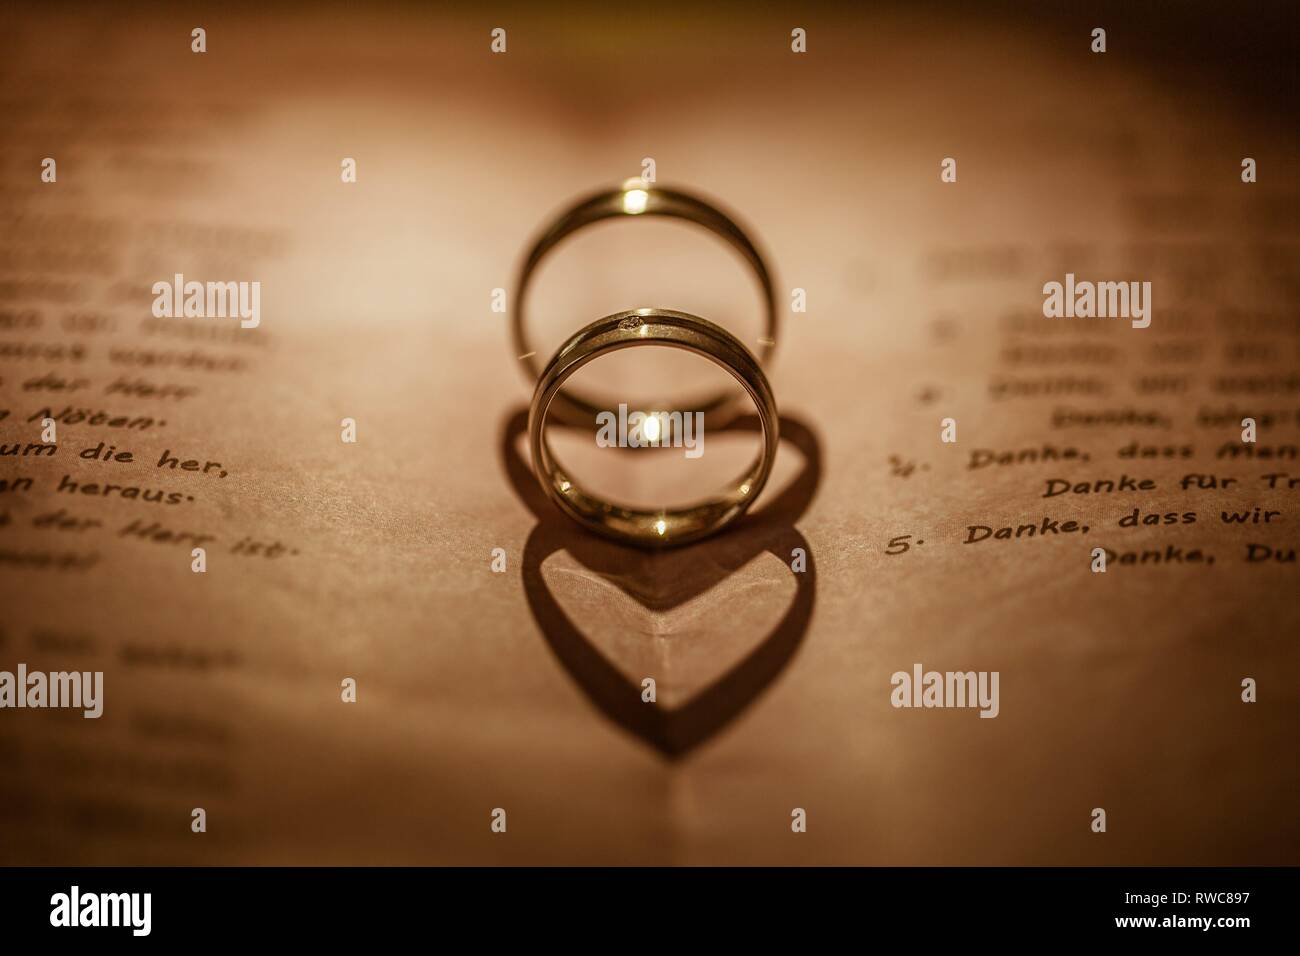 Deutschland. 28th July, 2018. Detail of two wedding rings in a folded lyrics card. The shadow of the rings is heart shaped by the kink in the map. | usage worldwide Credit: dpa/Alamy Live News Stock Photo